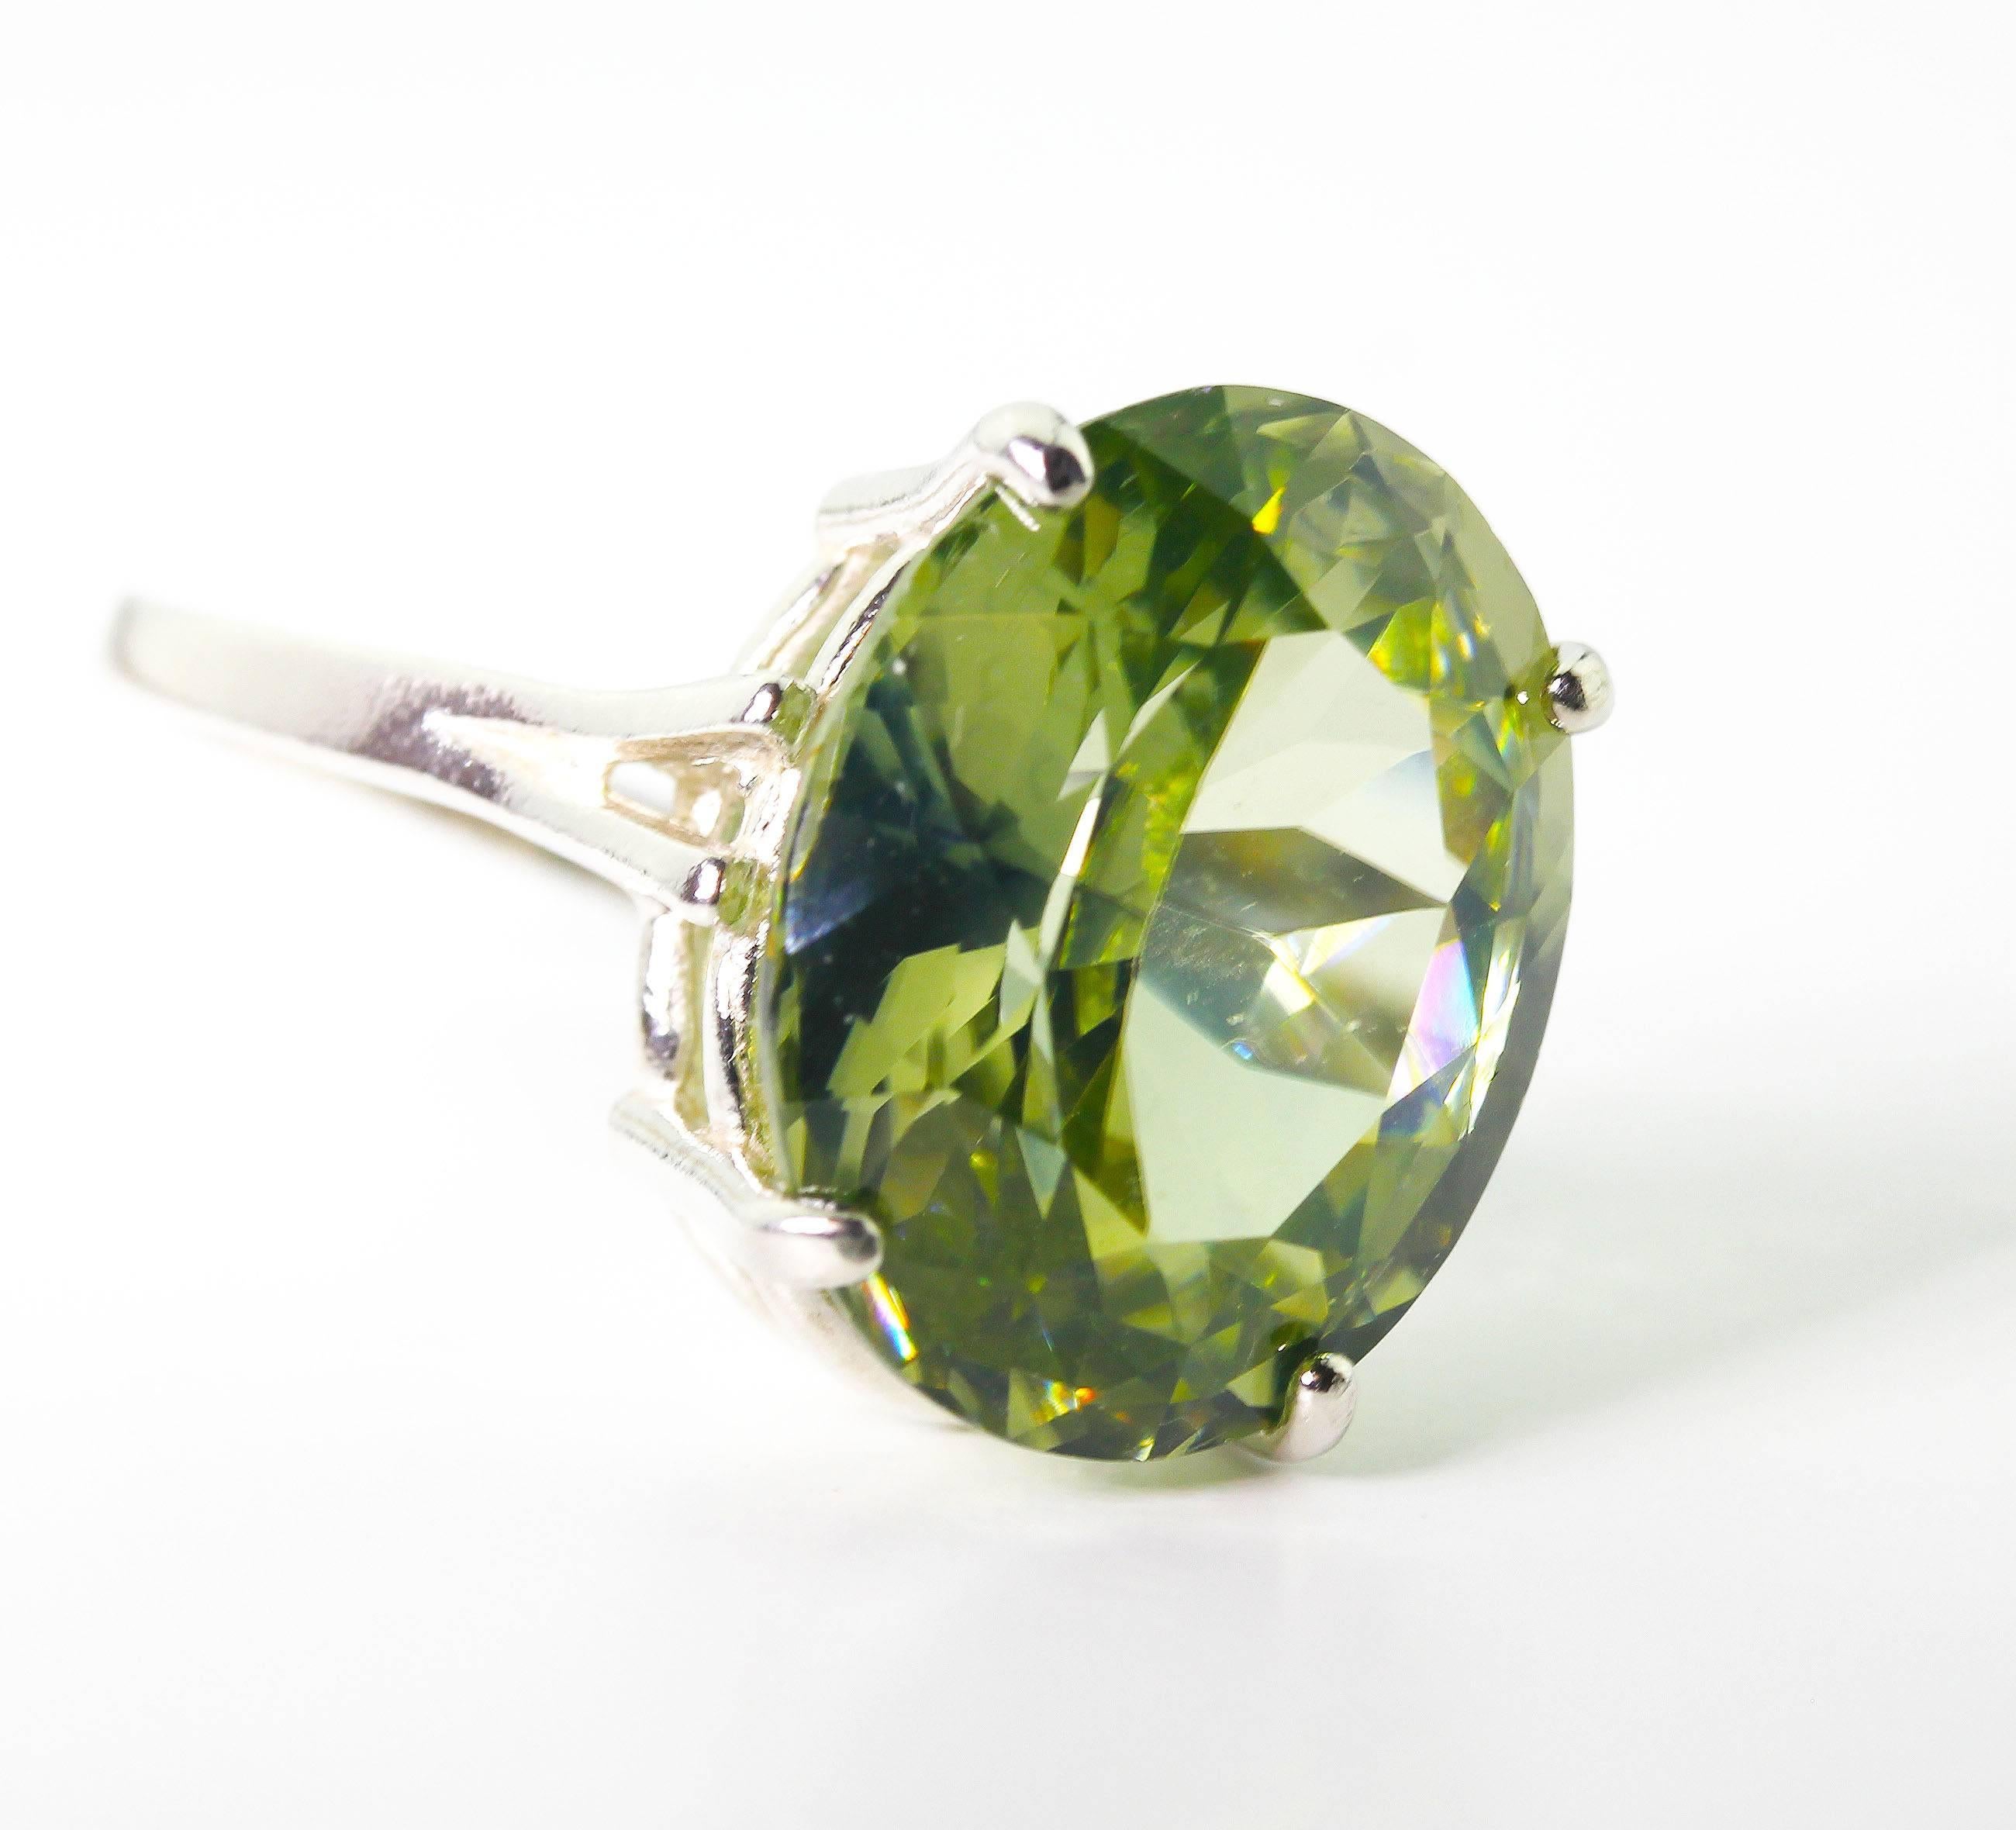 AJD Gorgeous 14.48 Cts Oval Natural Sri Lankan Green Zircon Cocktail Ring In New Condition For Sale In Raleigh, NC